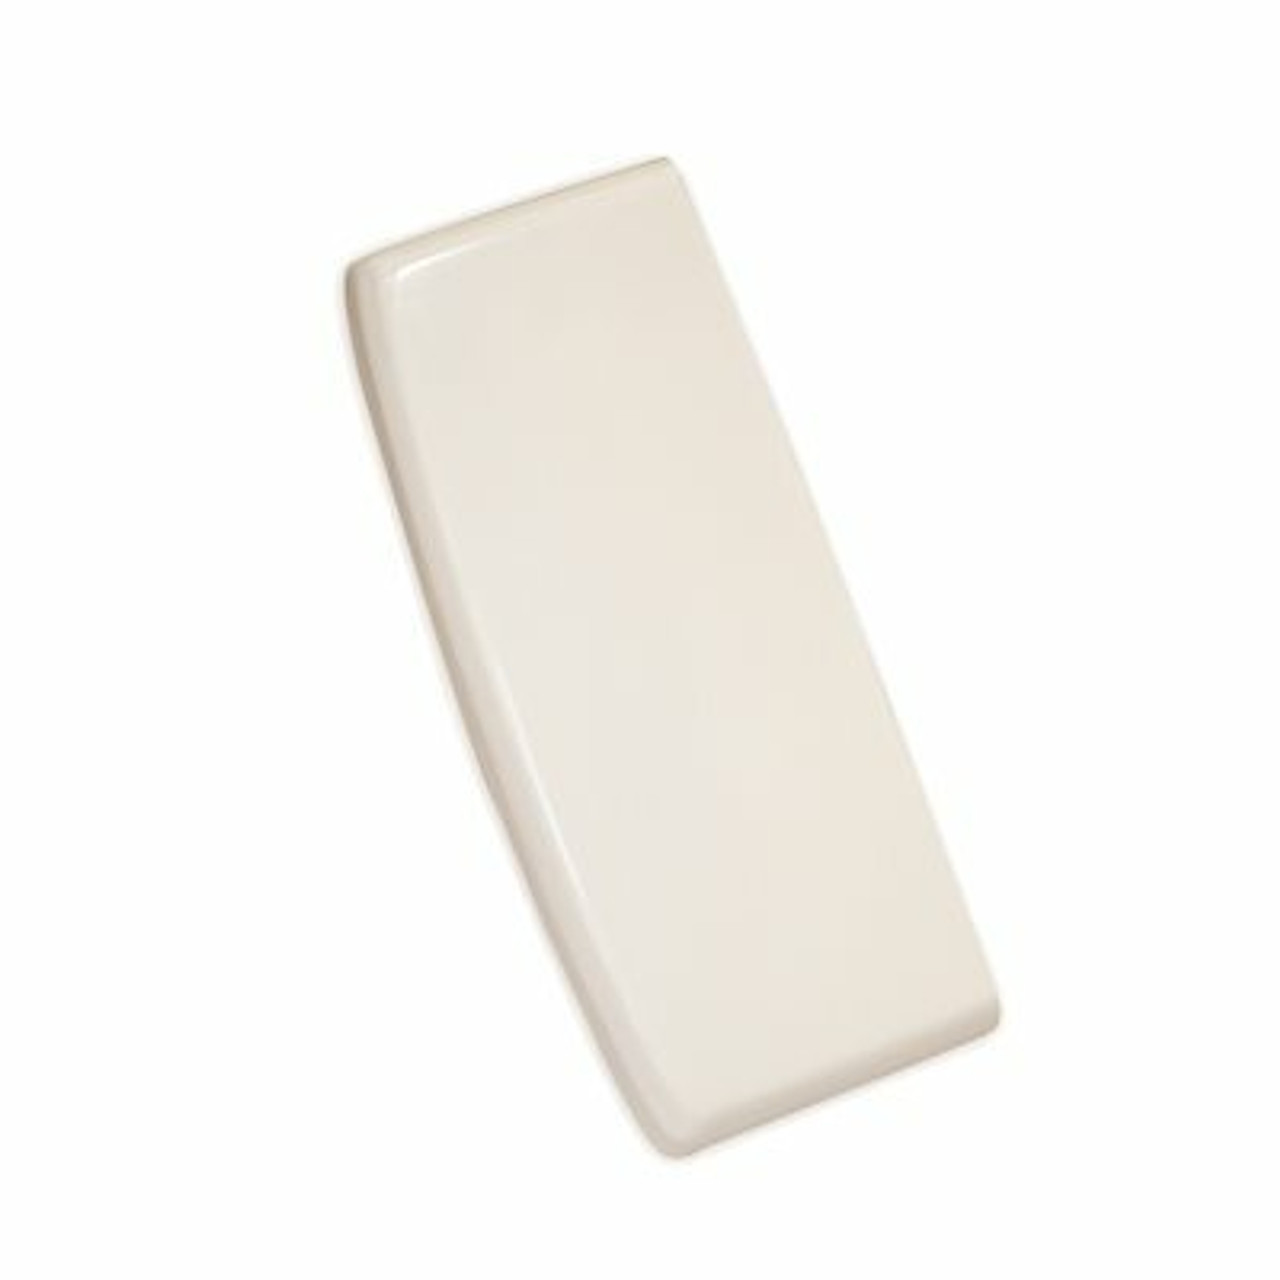 Toilid Pl-1 Replacement Tank Lid In White